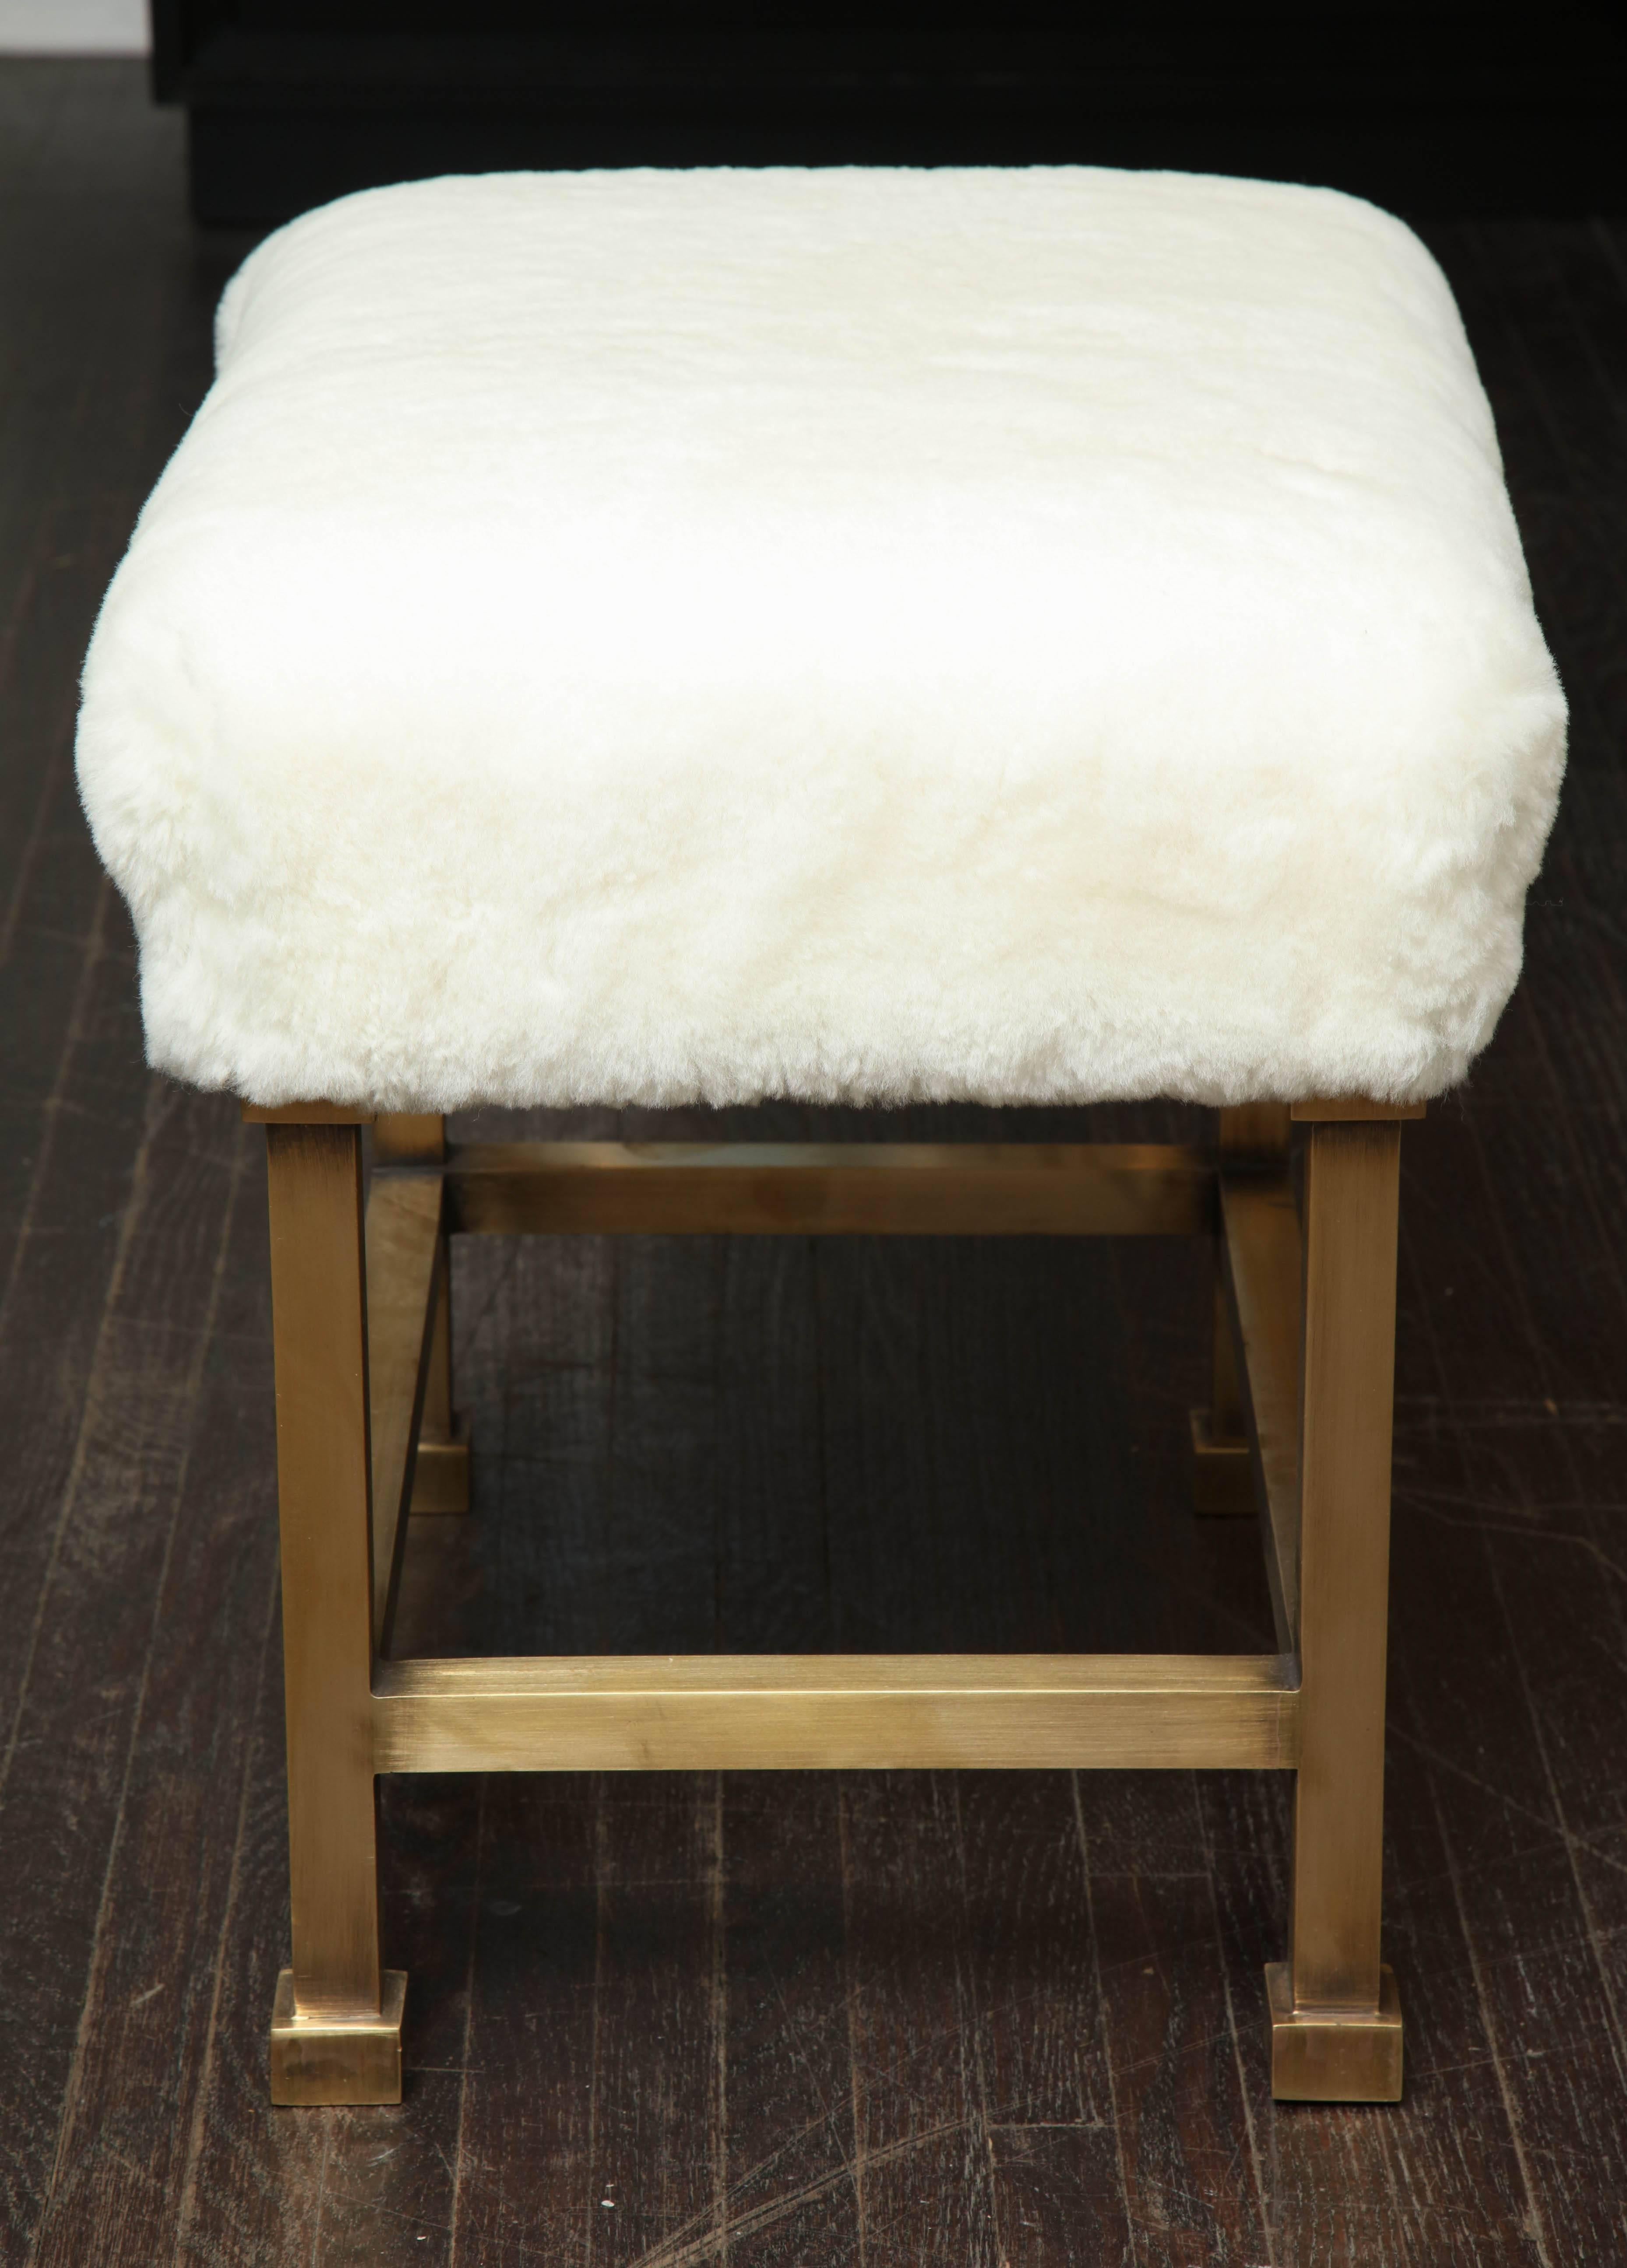 A chic pair of made-to-order stools with white shearling upholstery top and metal legs in light antiqued brass finish. The shearling used on the stools is genuine and may have subtle tone variations as natural product. A shearling sample for